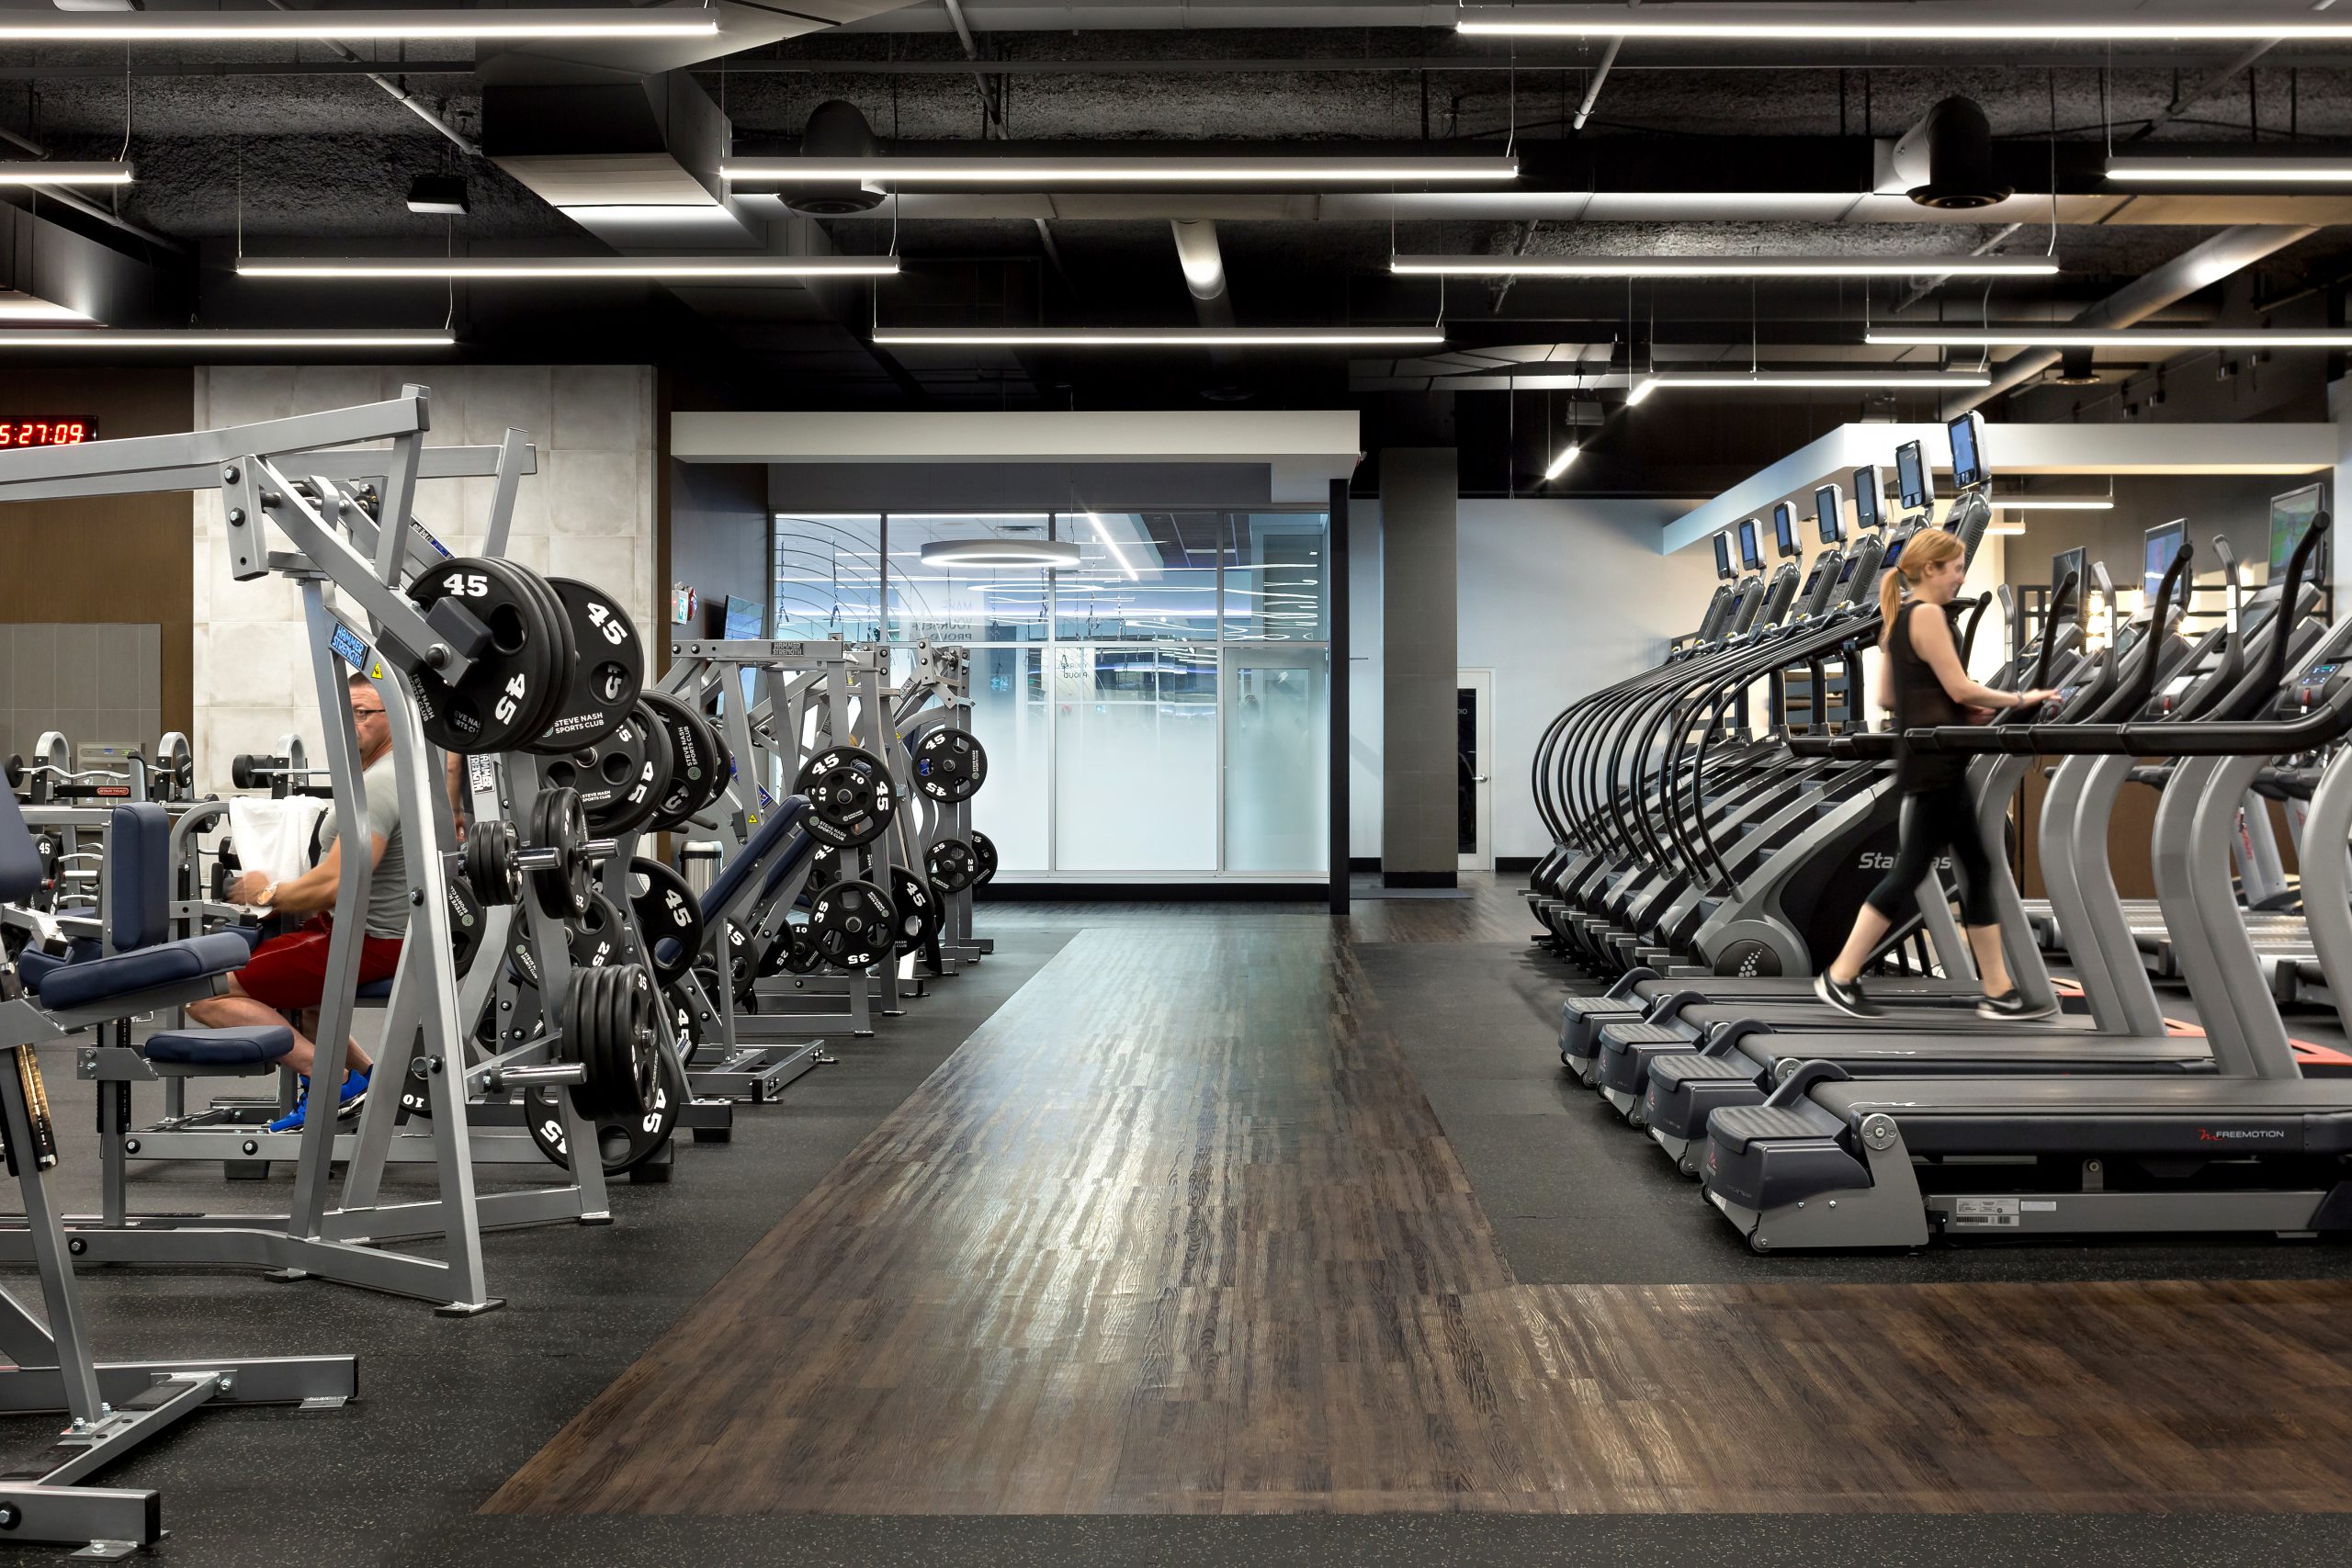 Bikes & Weights, Gym Interior Design, Steve Nash Park Royal in West Vancouver BC, by Cutler